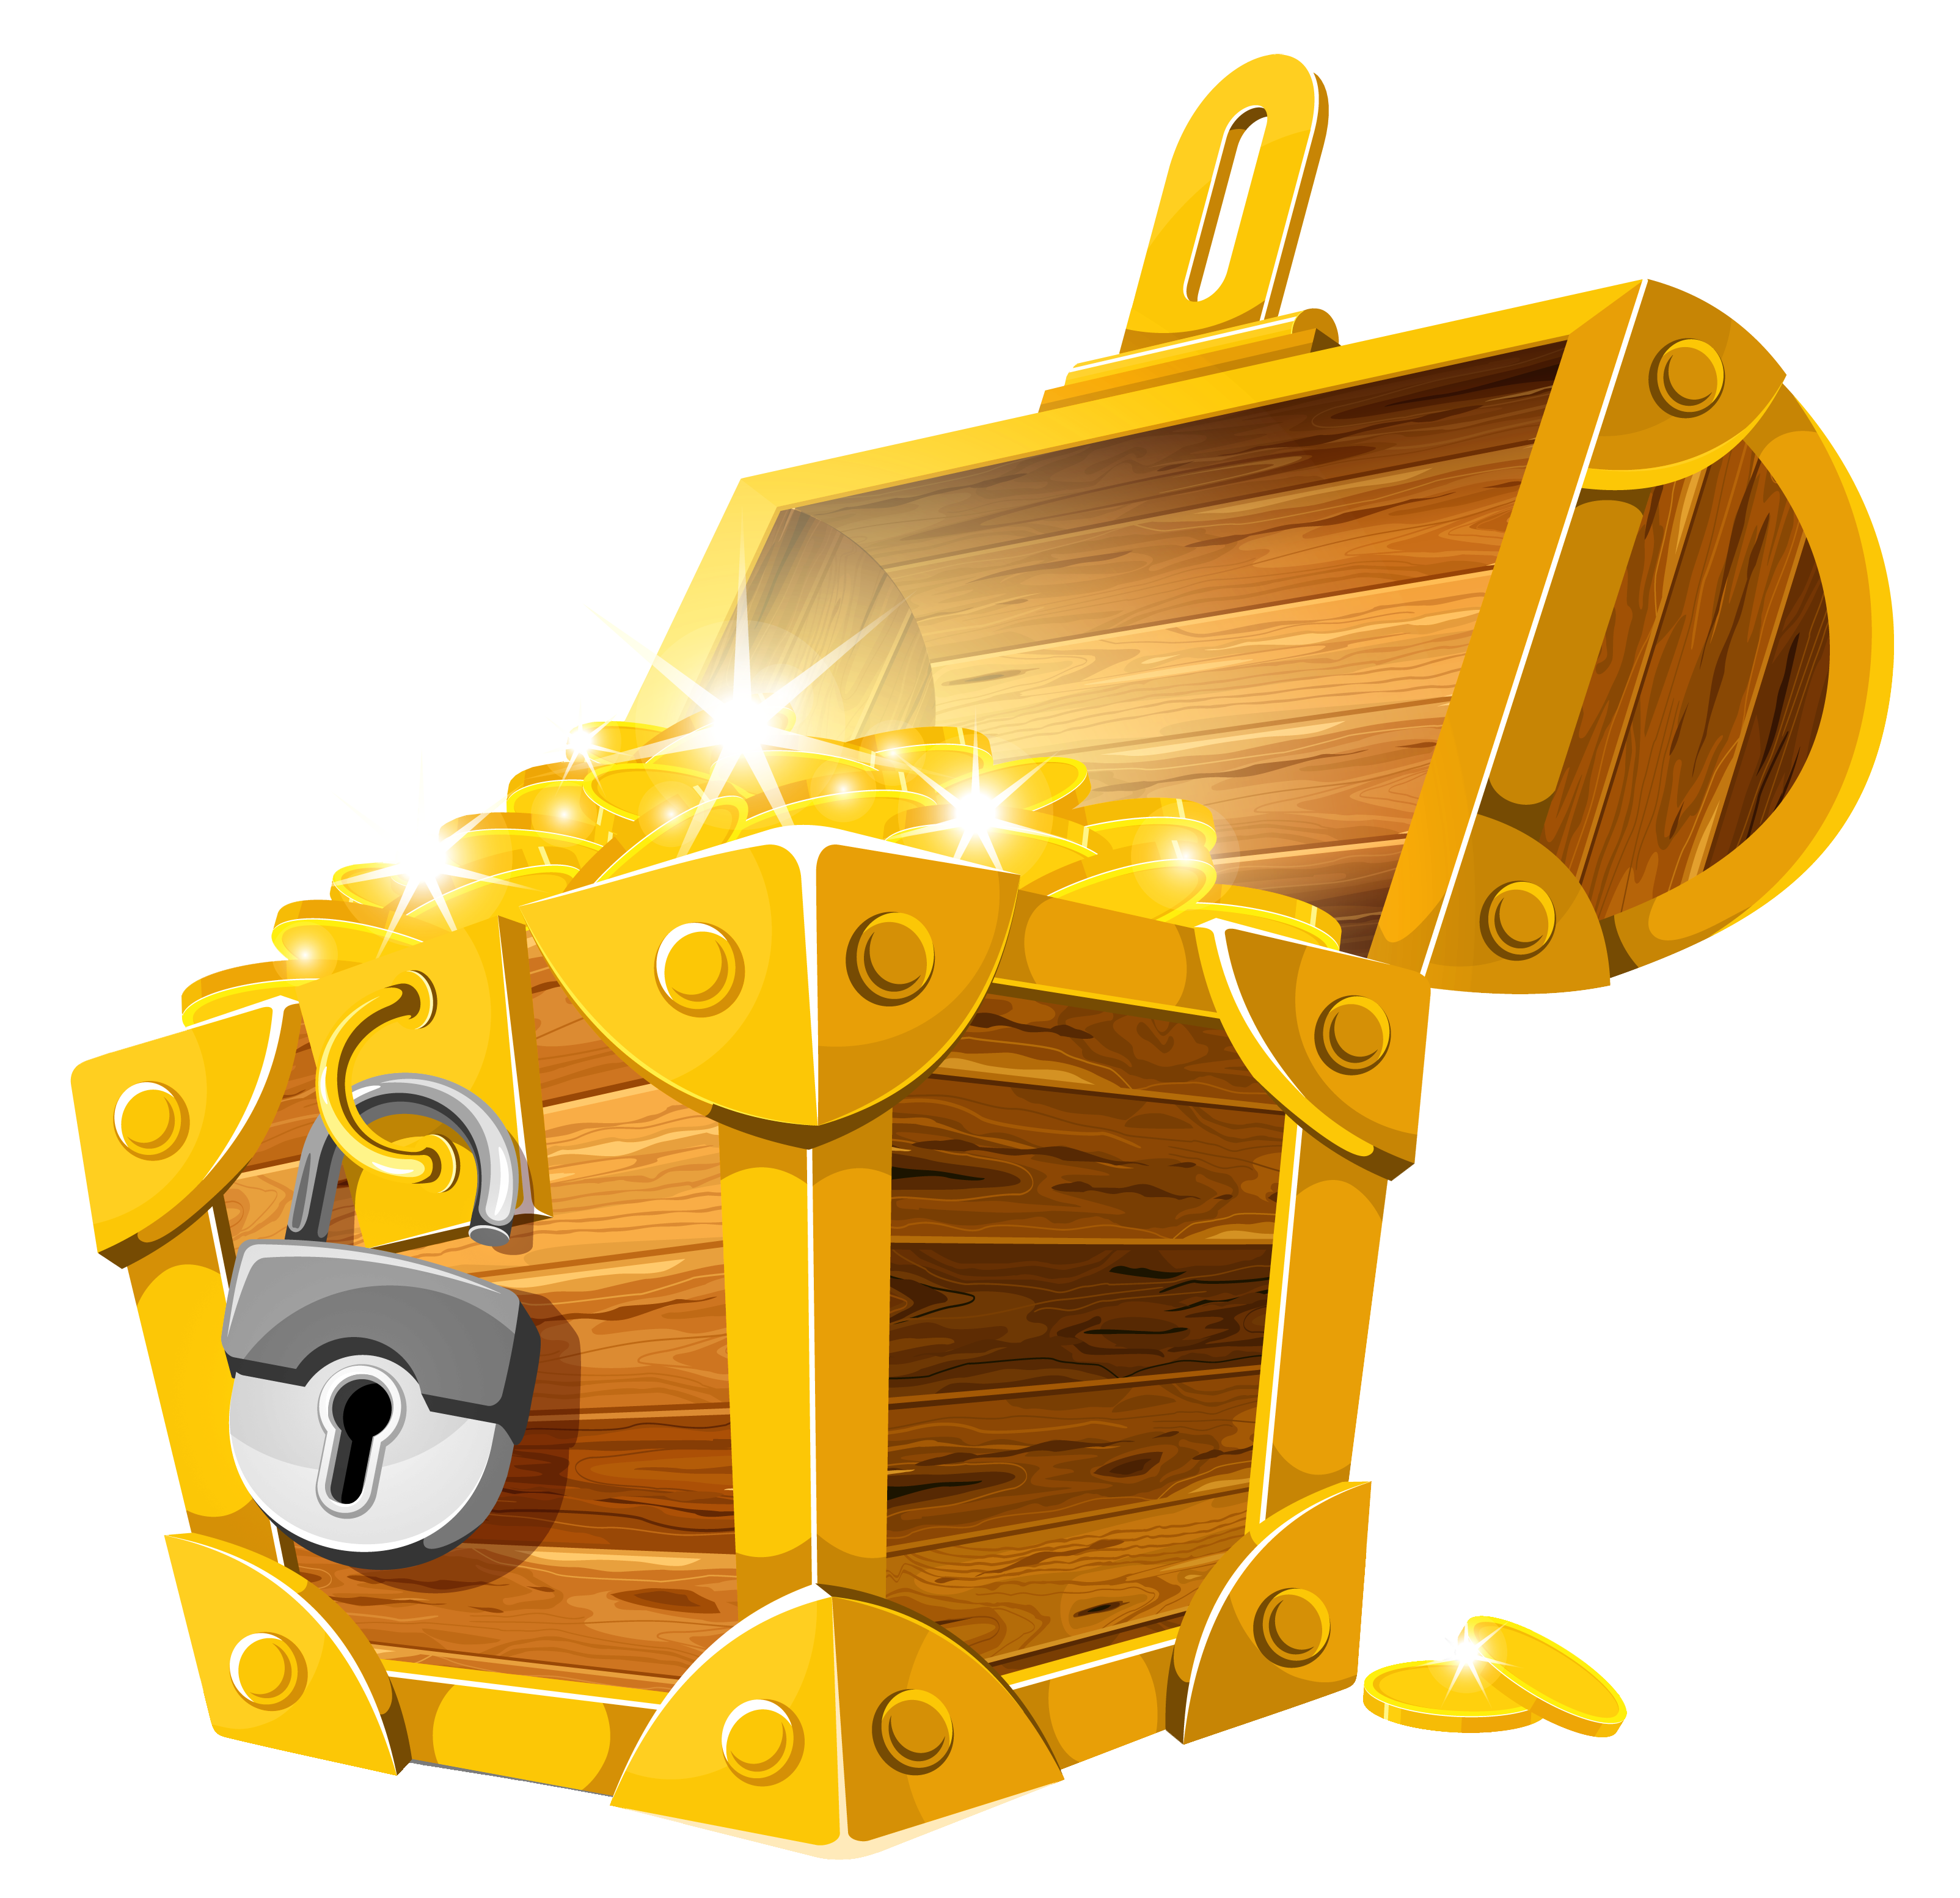 Treasure Chest Hd Transparent, Side View Of Empty Medieval Steel Treasure  Chest, Gold, Chest, Treasure PNG Image For Free Download